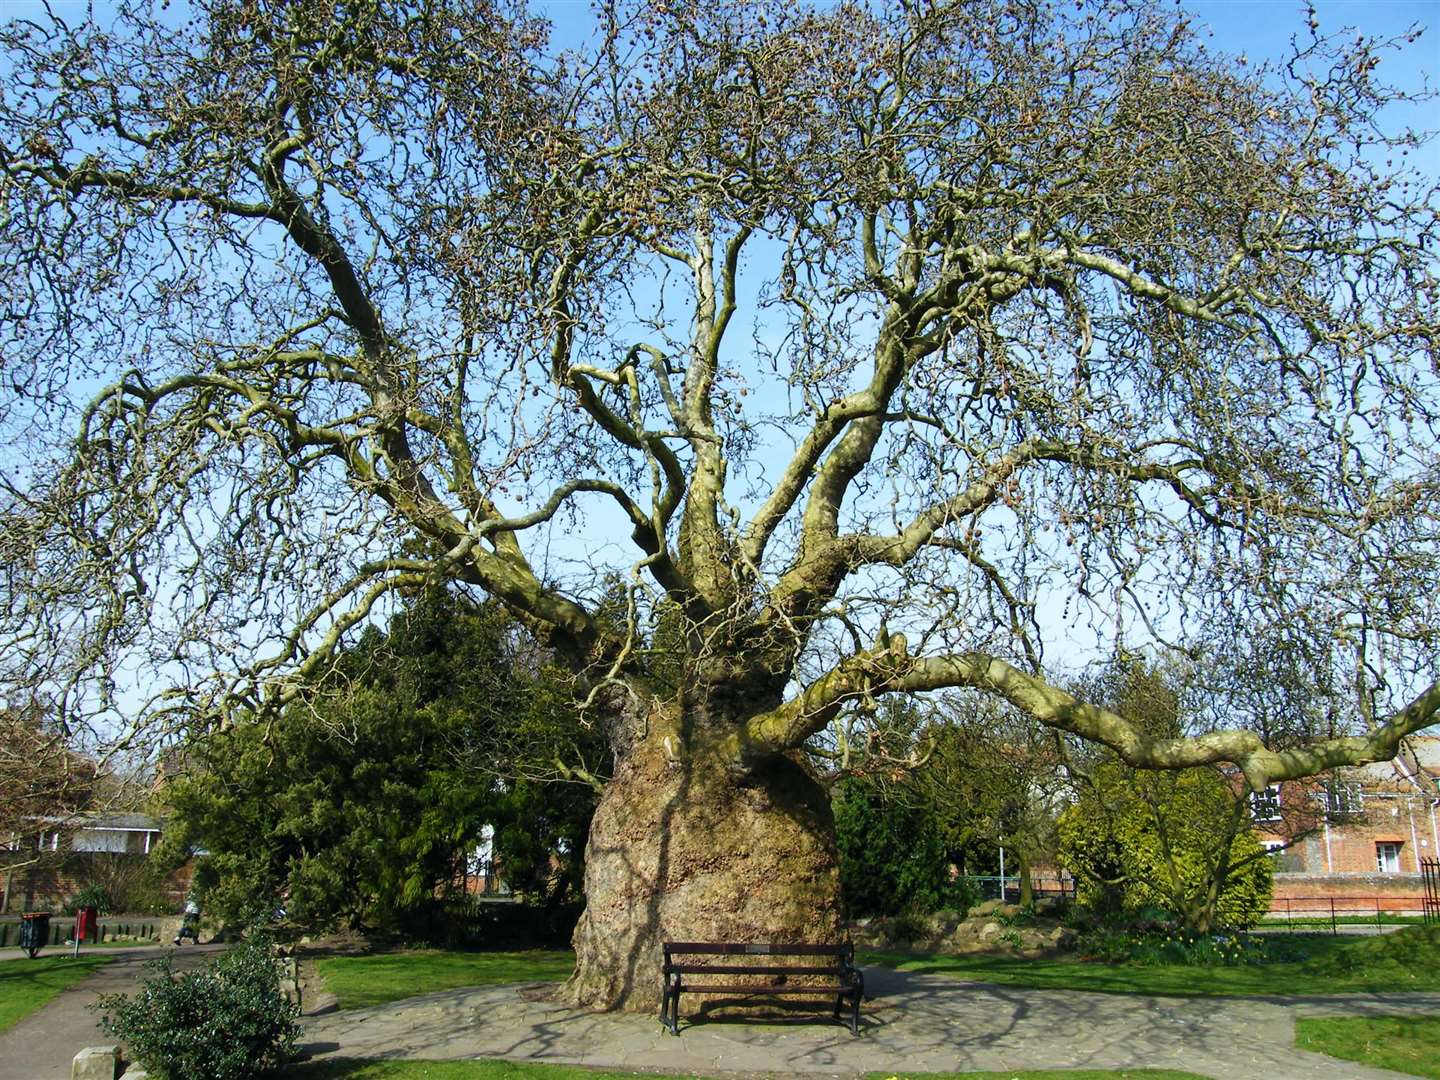 The strange tree in Westgate Gardens draws curious crowds to see its extraordinary shape and size. Picture: Colin Miles